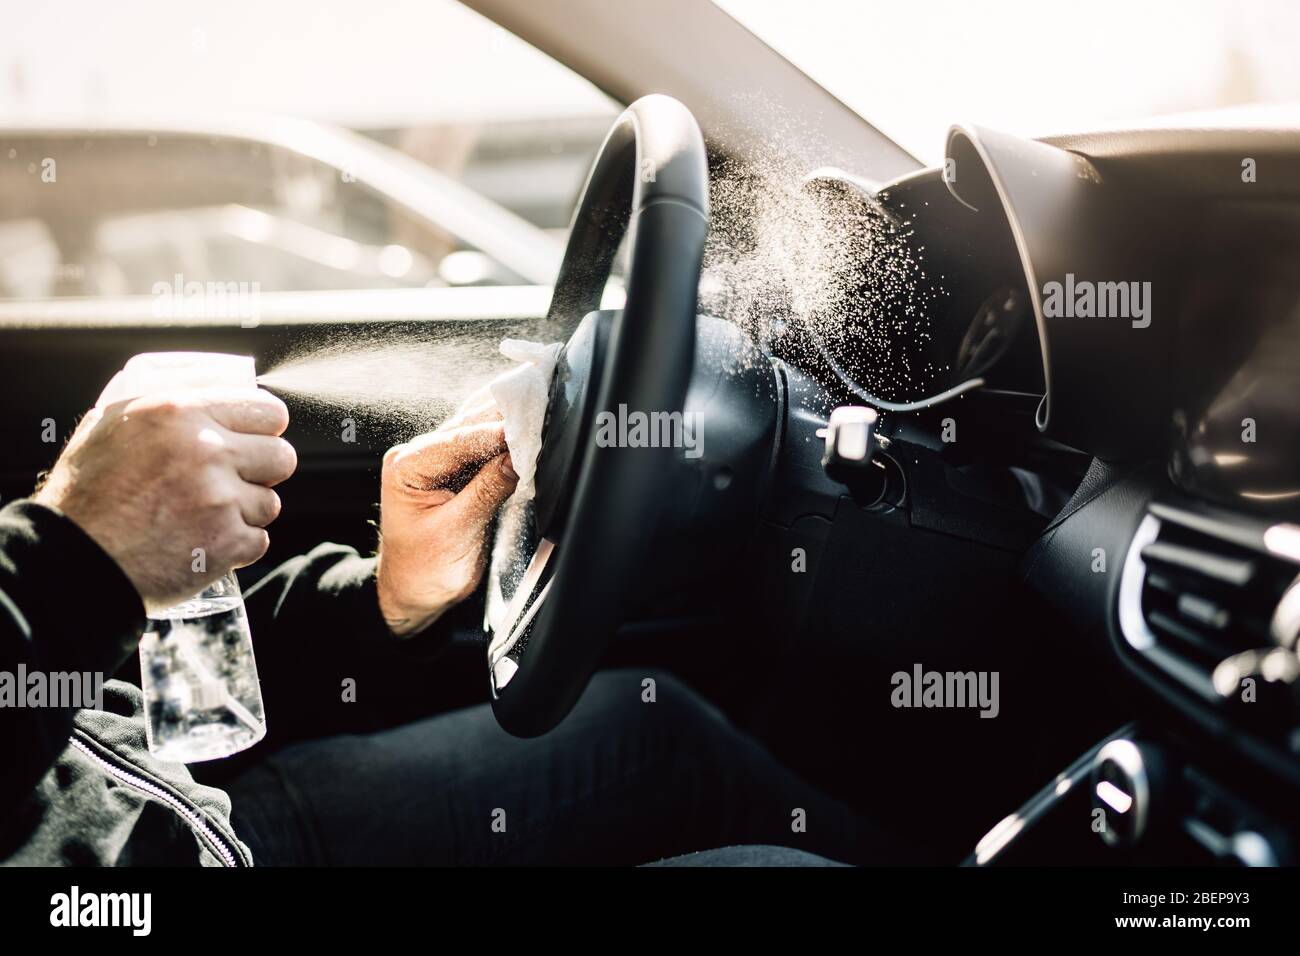 Car owner disinfecting vehicle with alcohol based sanitizing solution spray.Touched surfaces sanitation.Coronavirus COVID-19 spread prevention.Cross-c Stock Photo